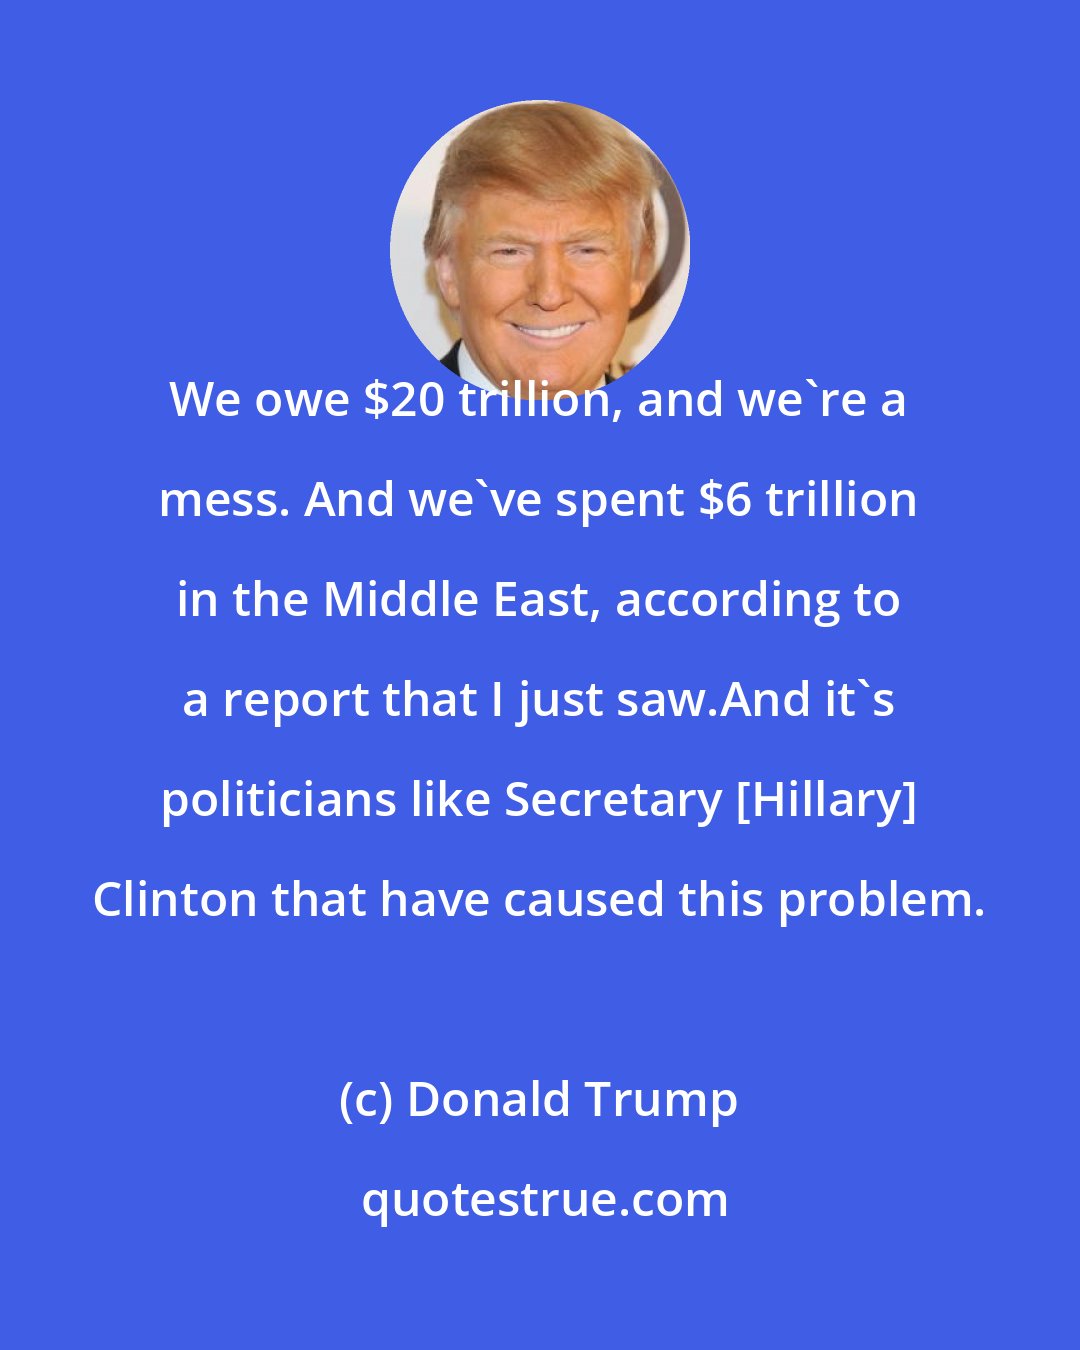 Donald Trump: We owe $20 trillion, and we're a mess. And we've spent $6 trillion in the Middle East, according to a report that I just saw.And it's politicians like Secretary [Hillary] Clinton that have caused this problem.